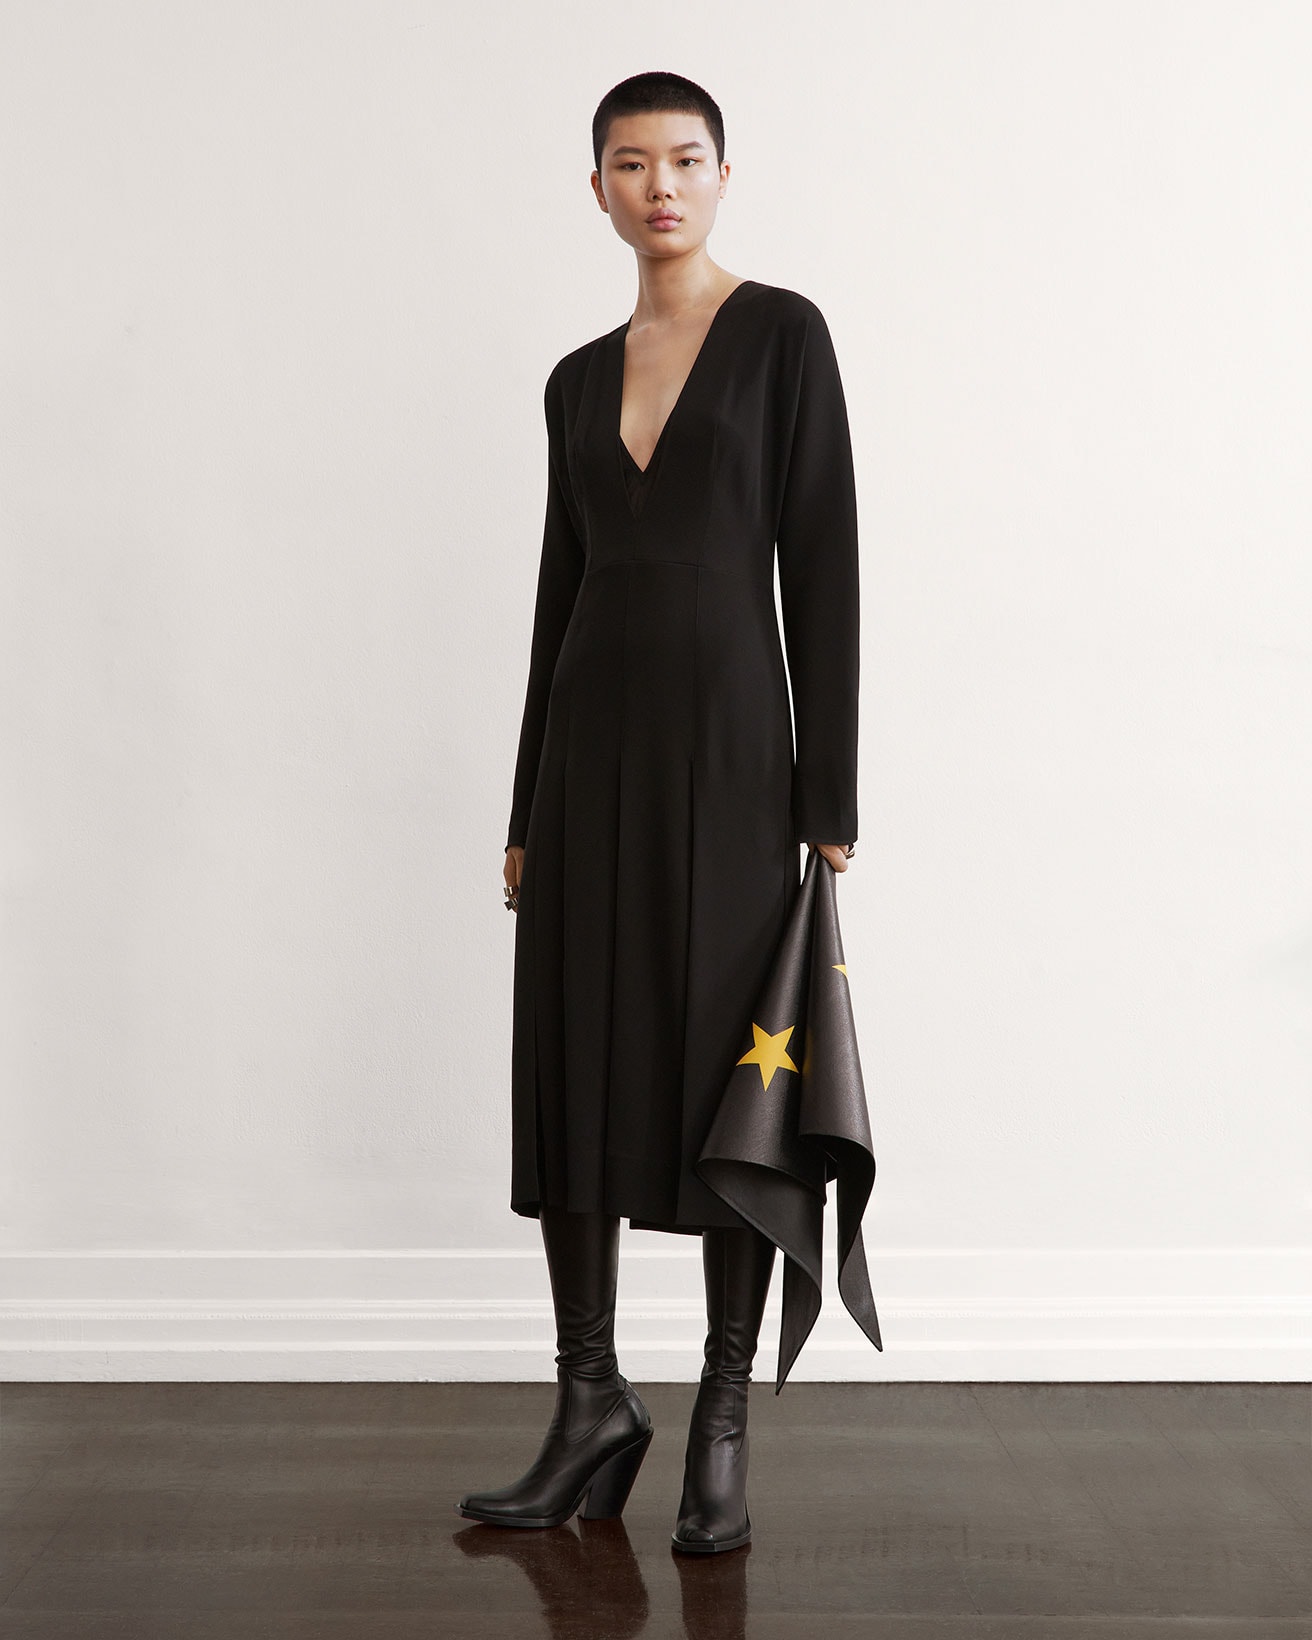 burberry fall winter fw21 pre-collection riccardo tisci black dress long sleeved